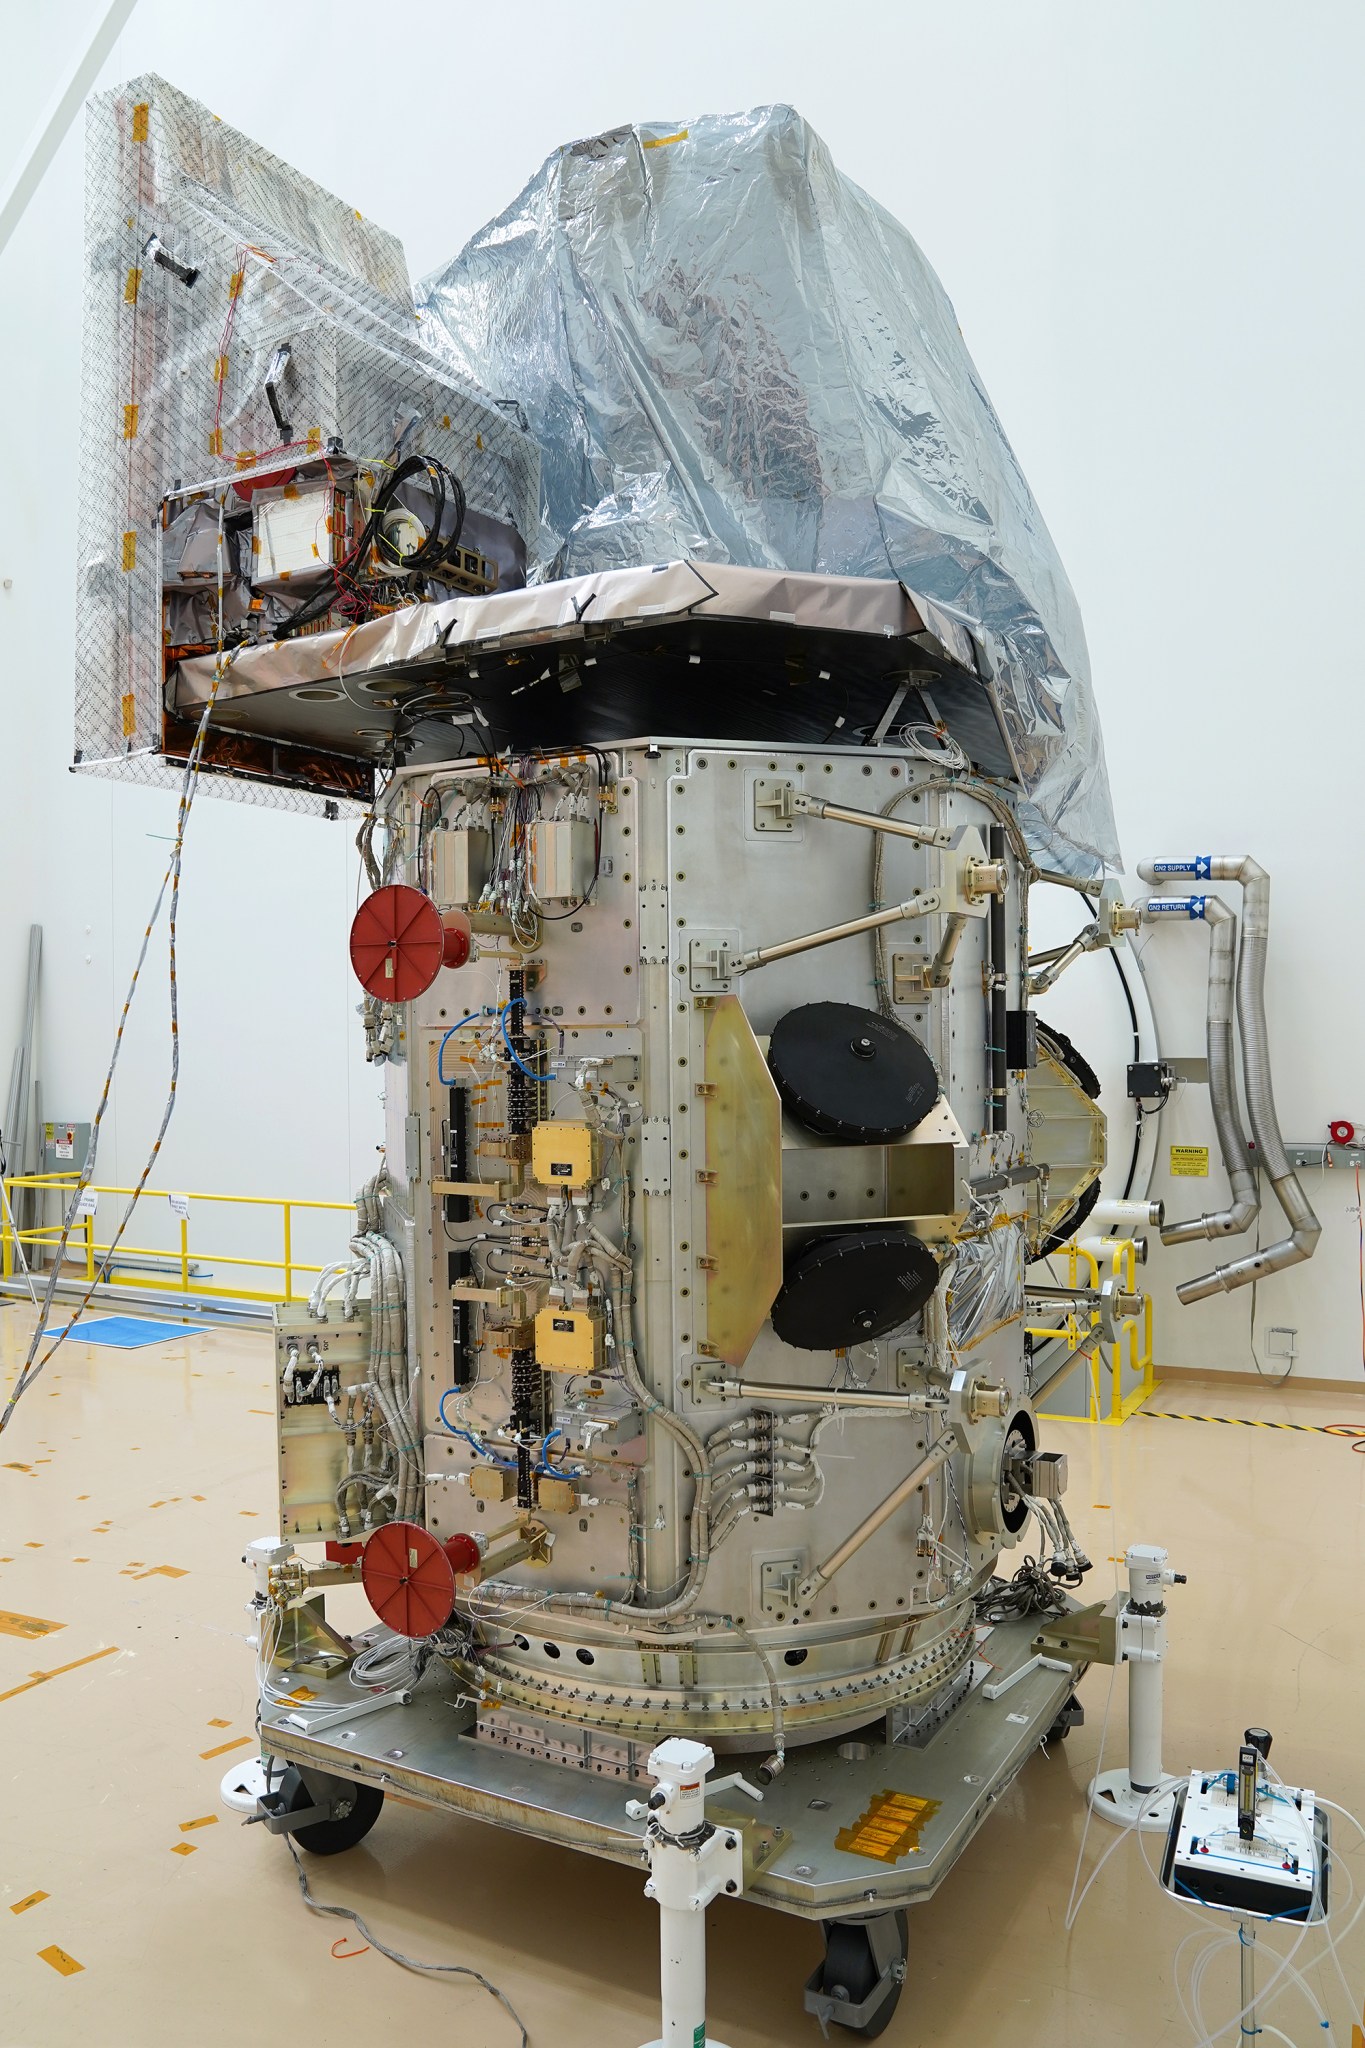 The Landsat 9 spacecraft sitting in a white clean room on a tan floor. The spacecraft is a silver cylinder with electrical components coming out all along the sides.